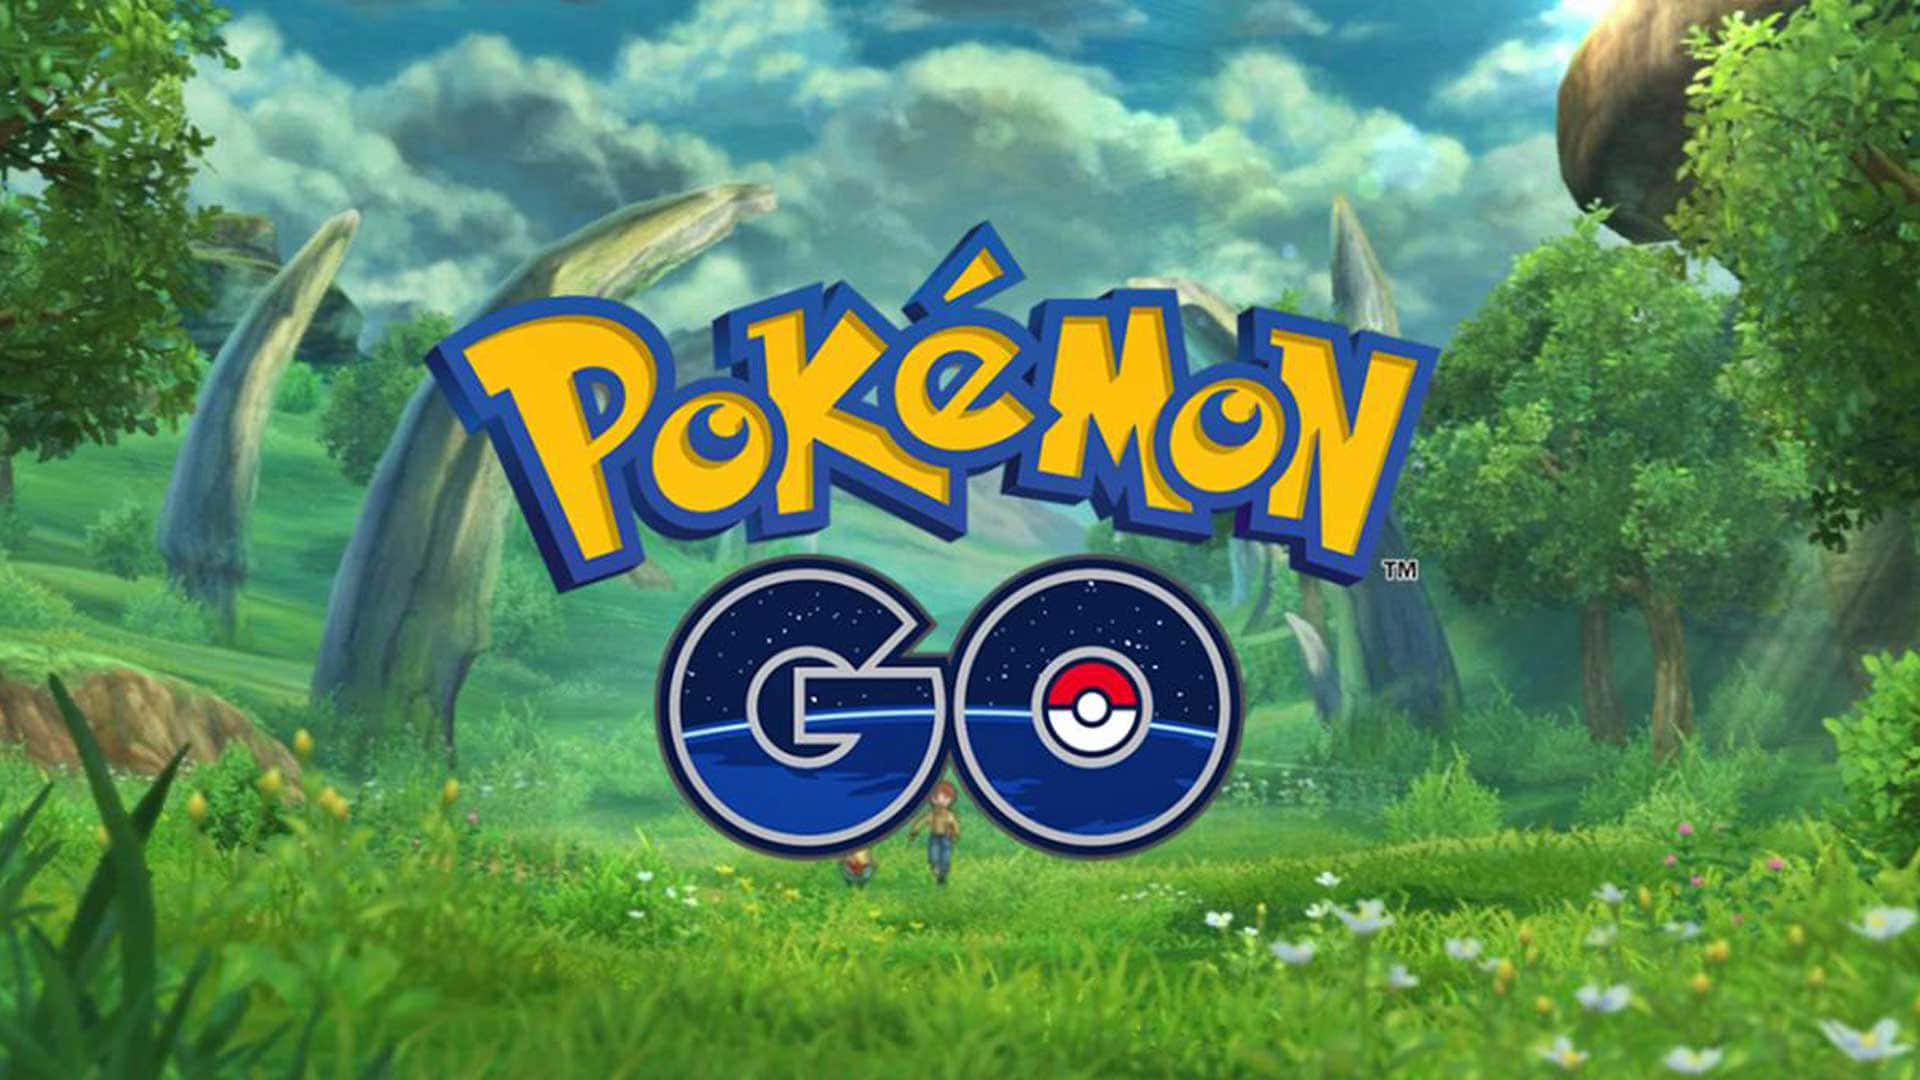 Pokemon Go Logo With Trees And Grass Wallpaper